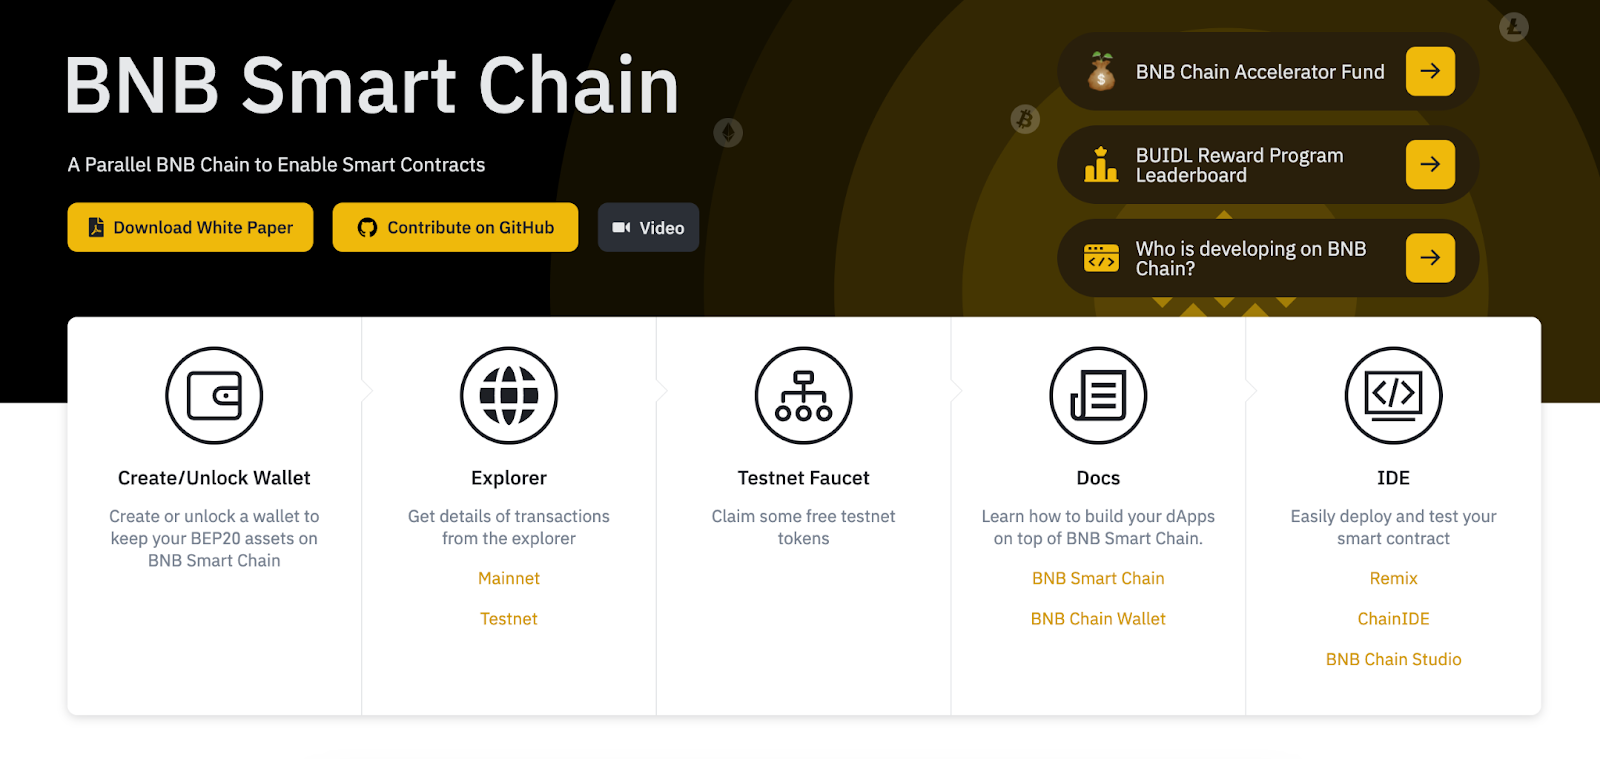 BNB Smart Chain features